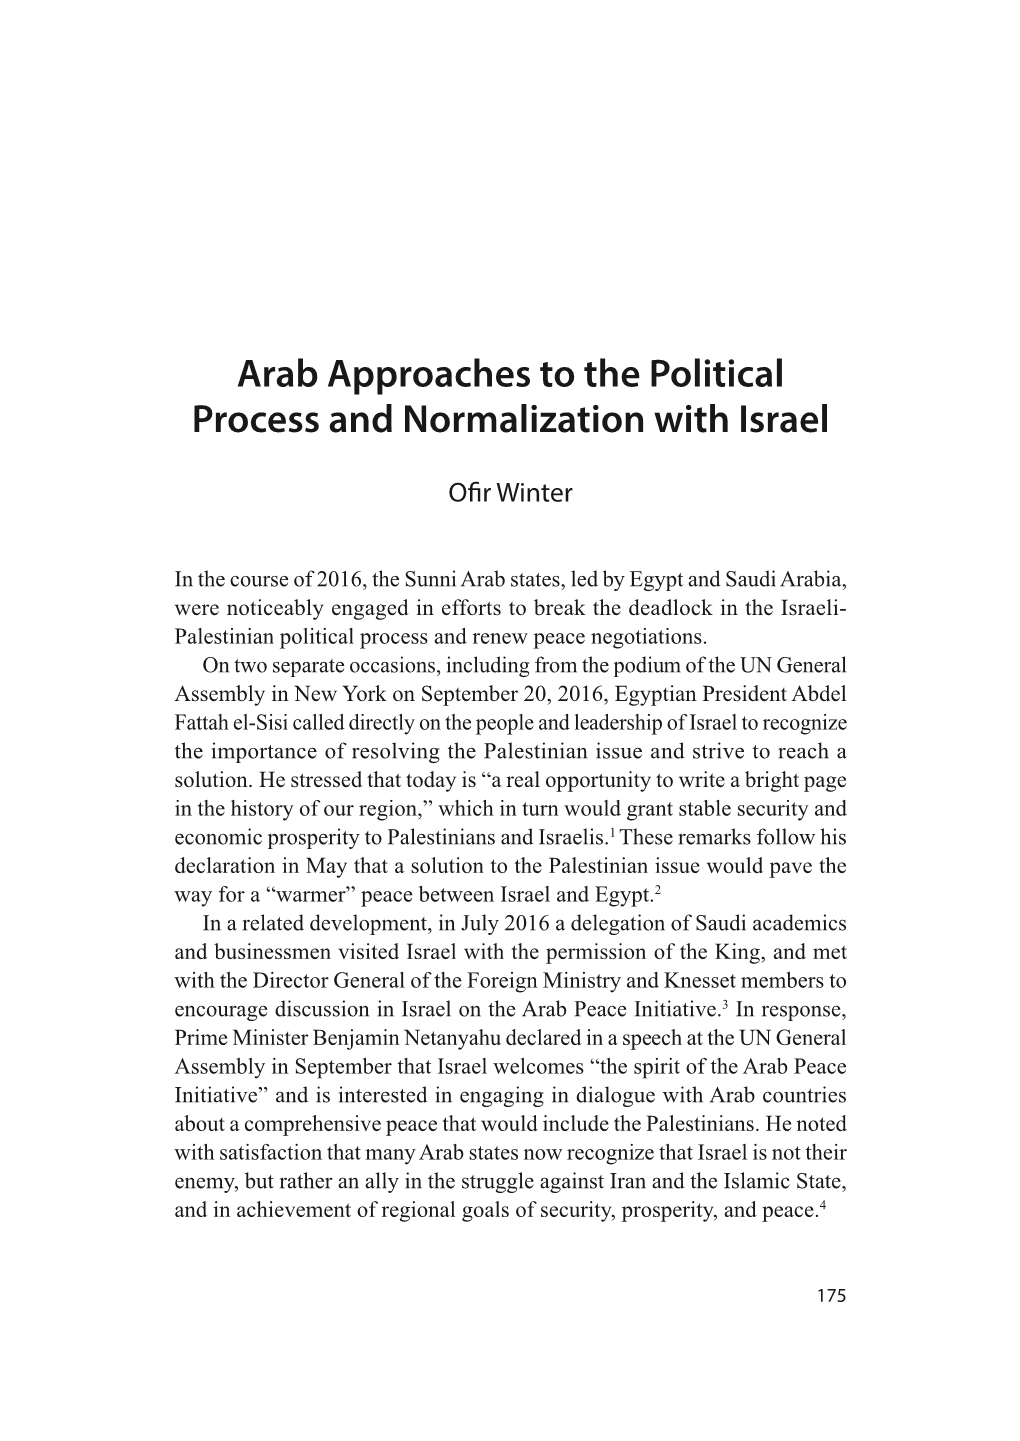 Arab Approaches to the Political Process and Normalization with Israel